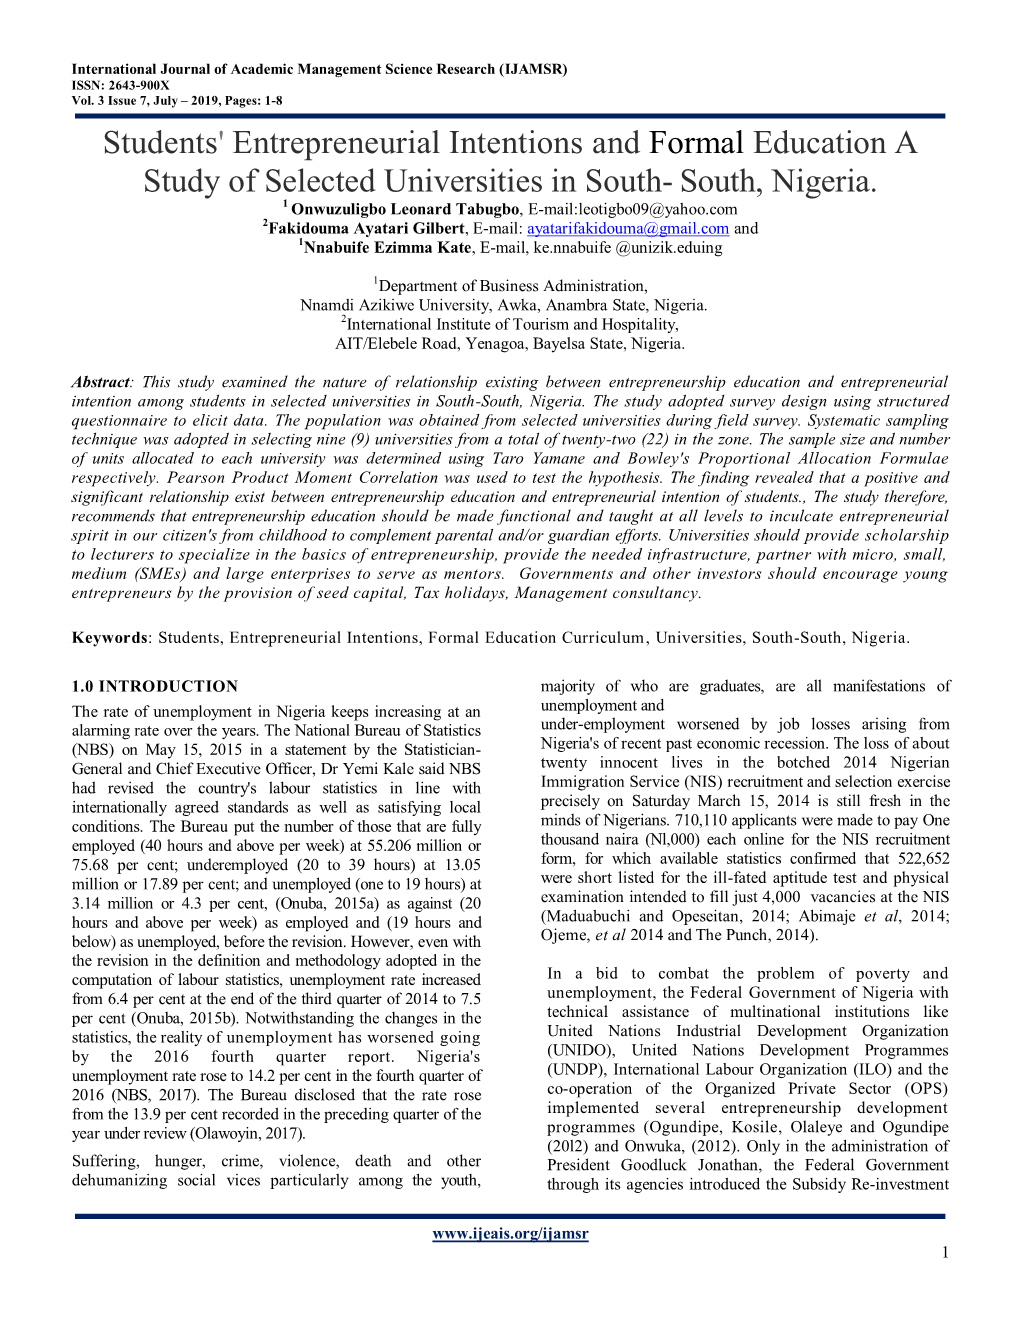 Students' Entrepreneurial Intentions and Formal Education a Study of Selected Universities in South- South, Nigeria